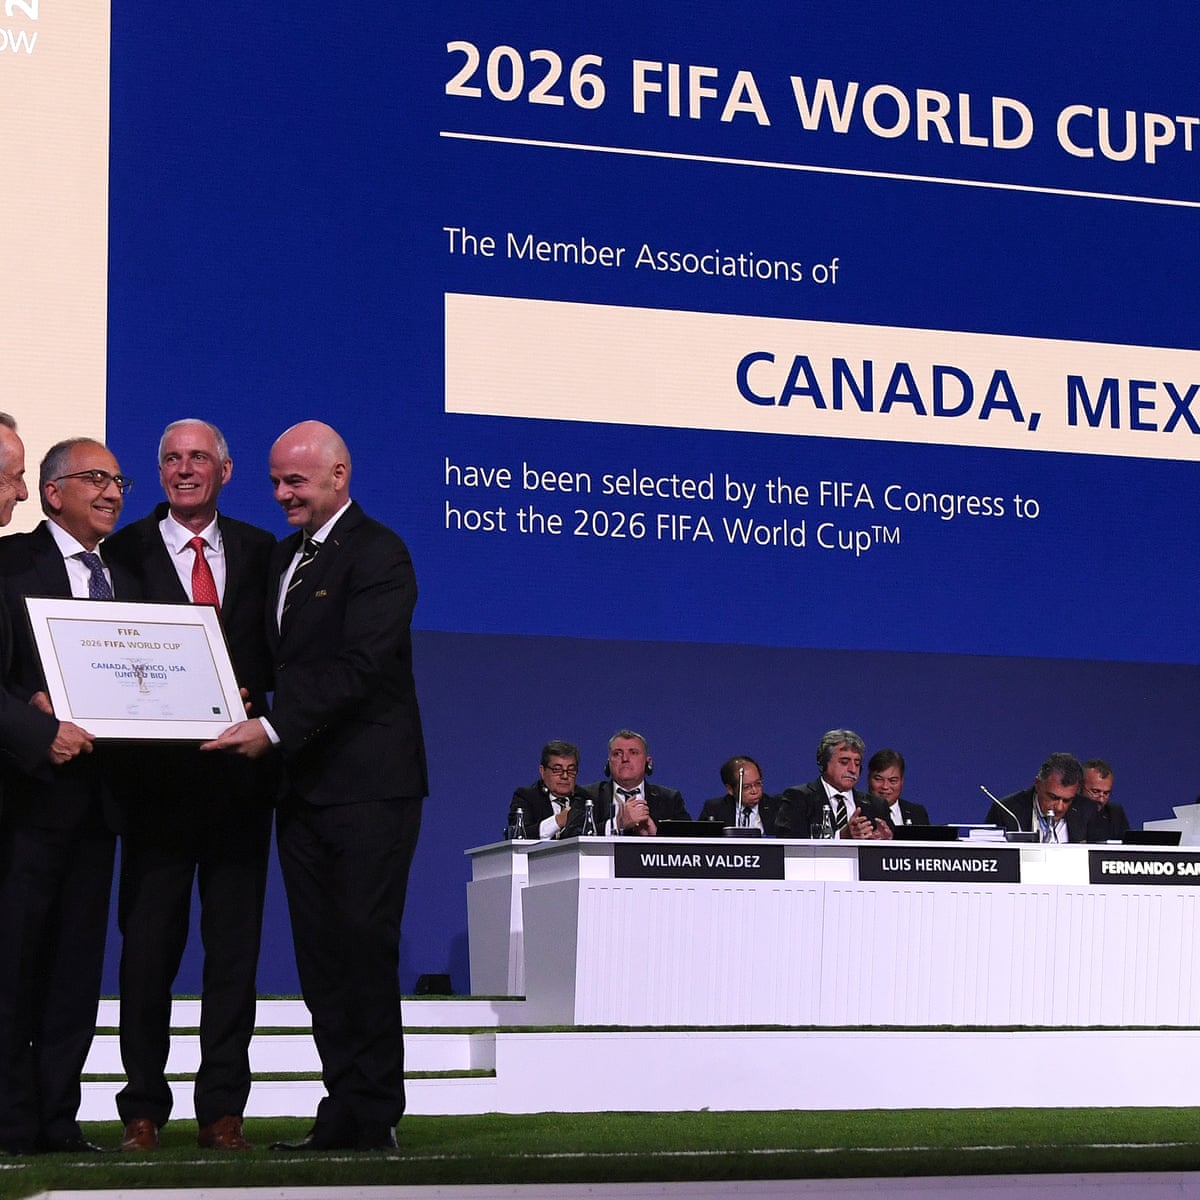 Three hosts, 48 teams: how the 2026 World Cup will work